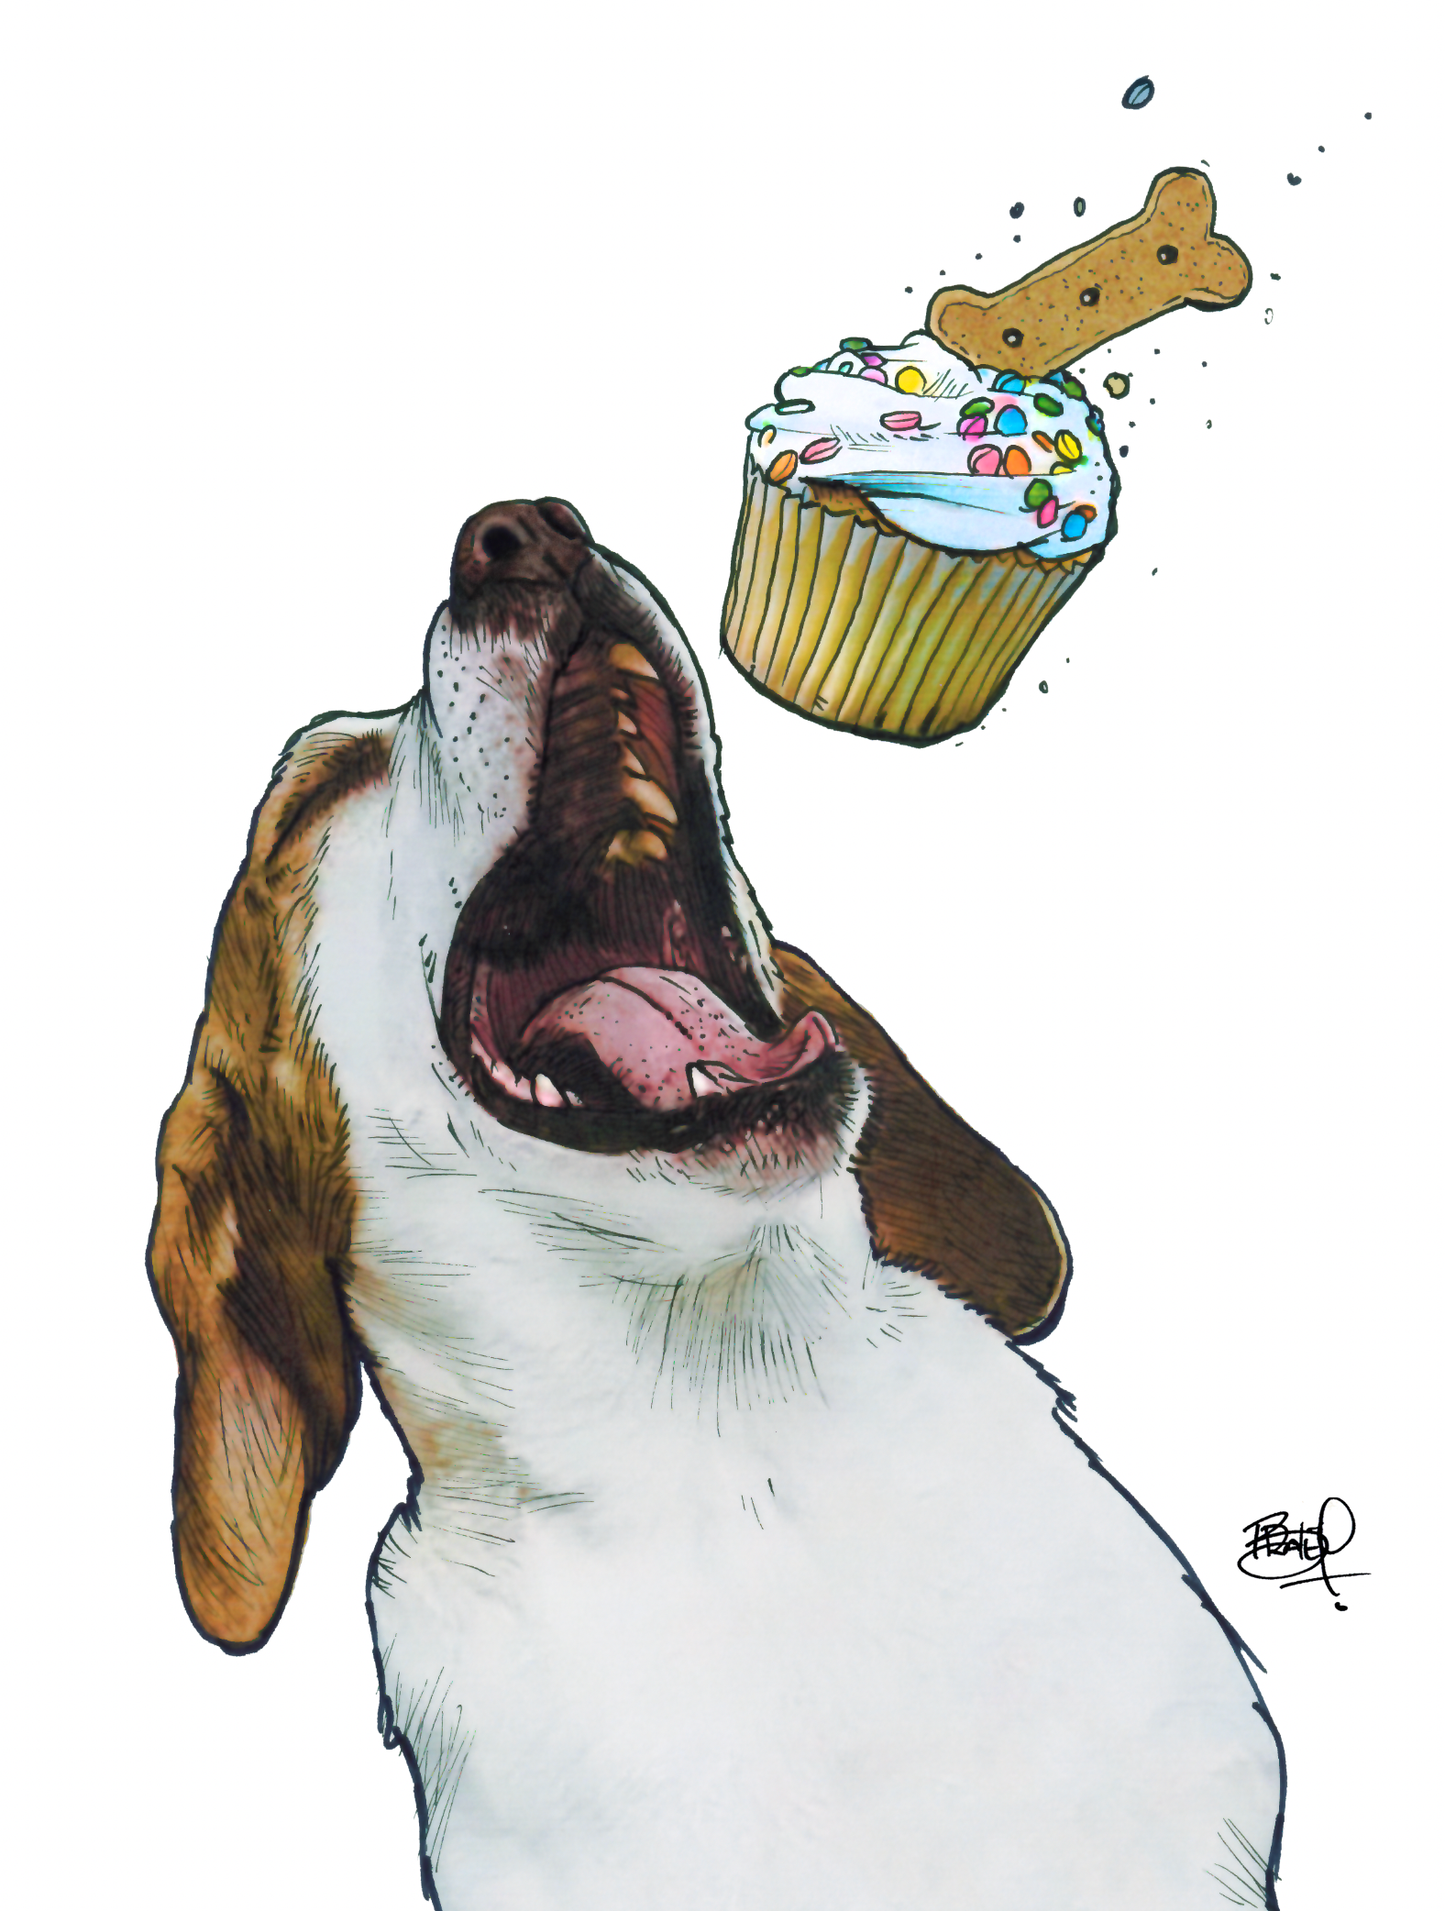 Pupcakes Greeting Card (blank inside) by Shawn Braley Illustration